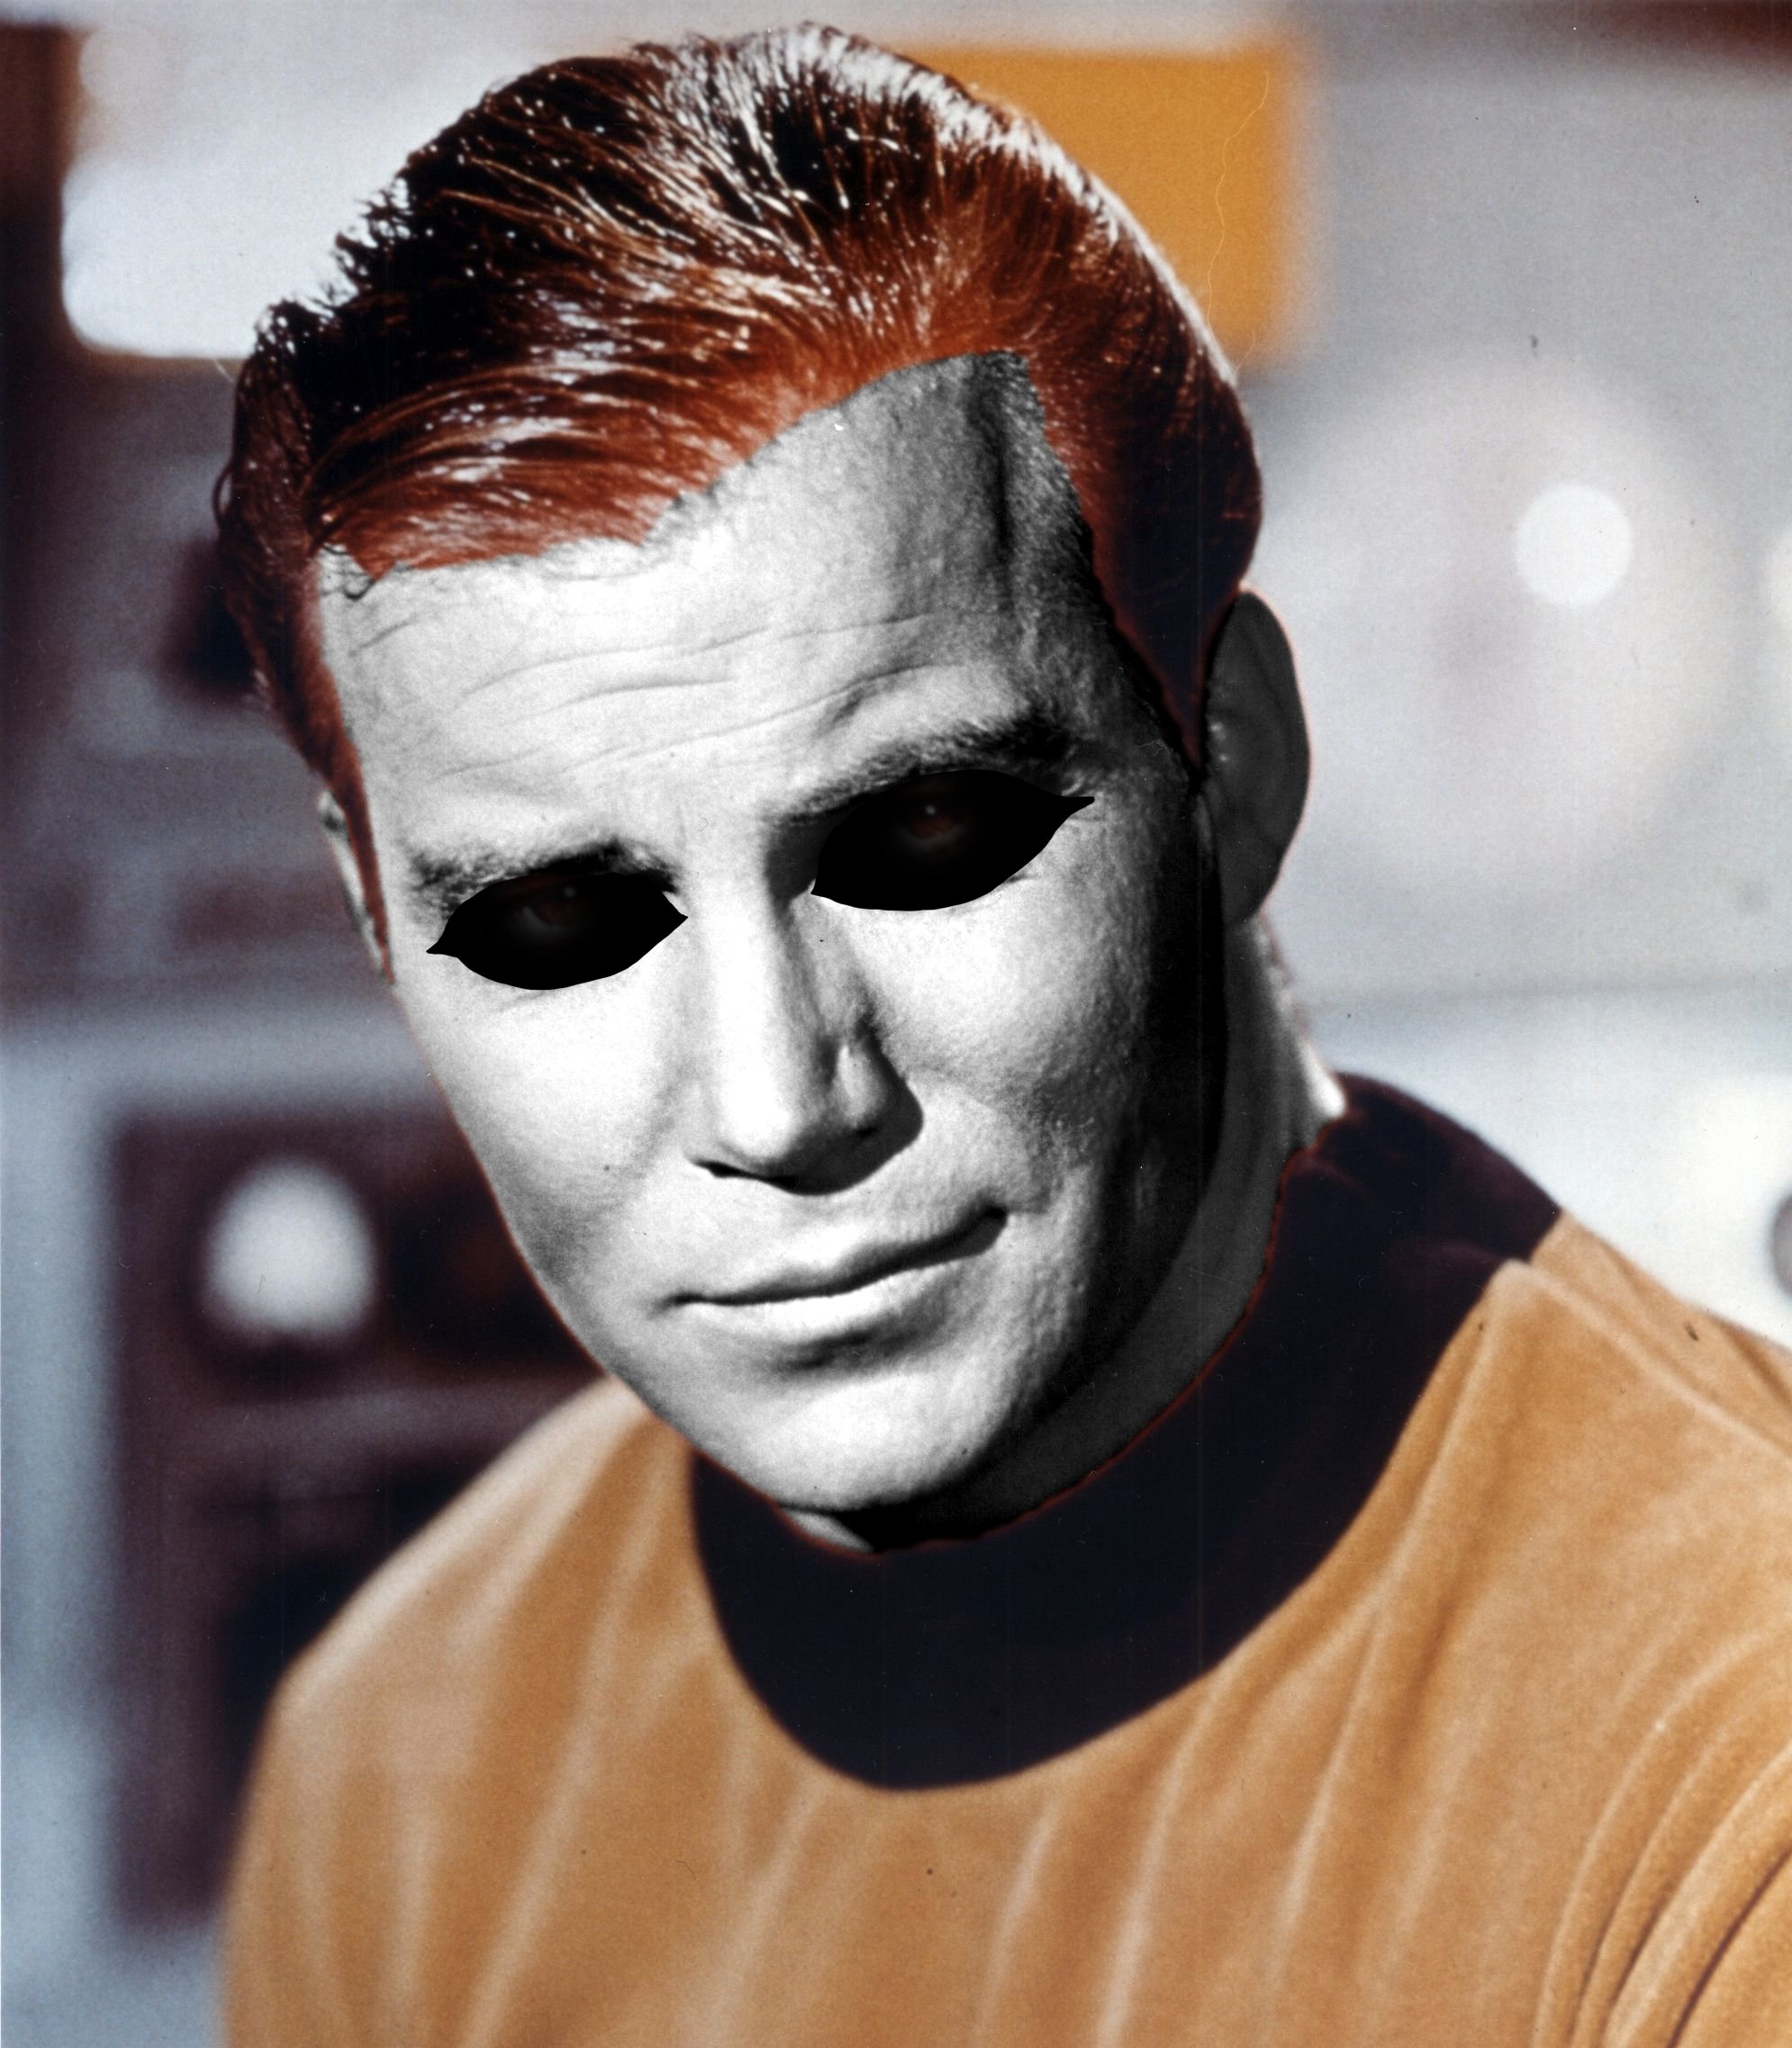 on Twitter: "The original Michael Myers mask a Captain Kirk one, painted white with the eyes So this felt like a logical to do. 🔪 Happy Halloween! 🎃